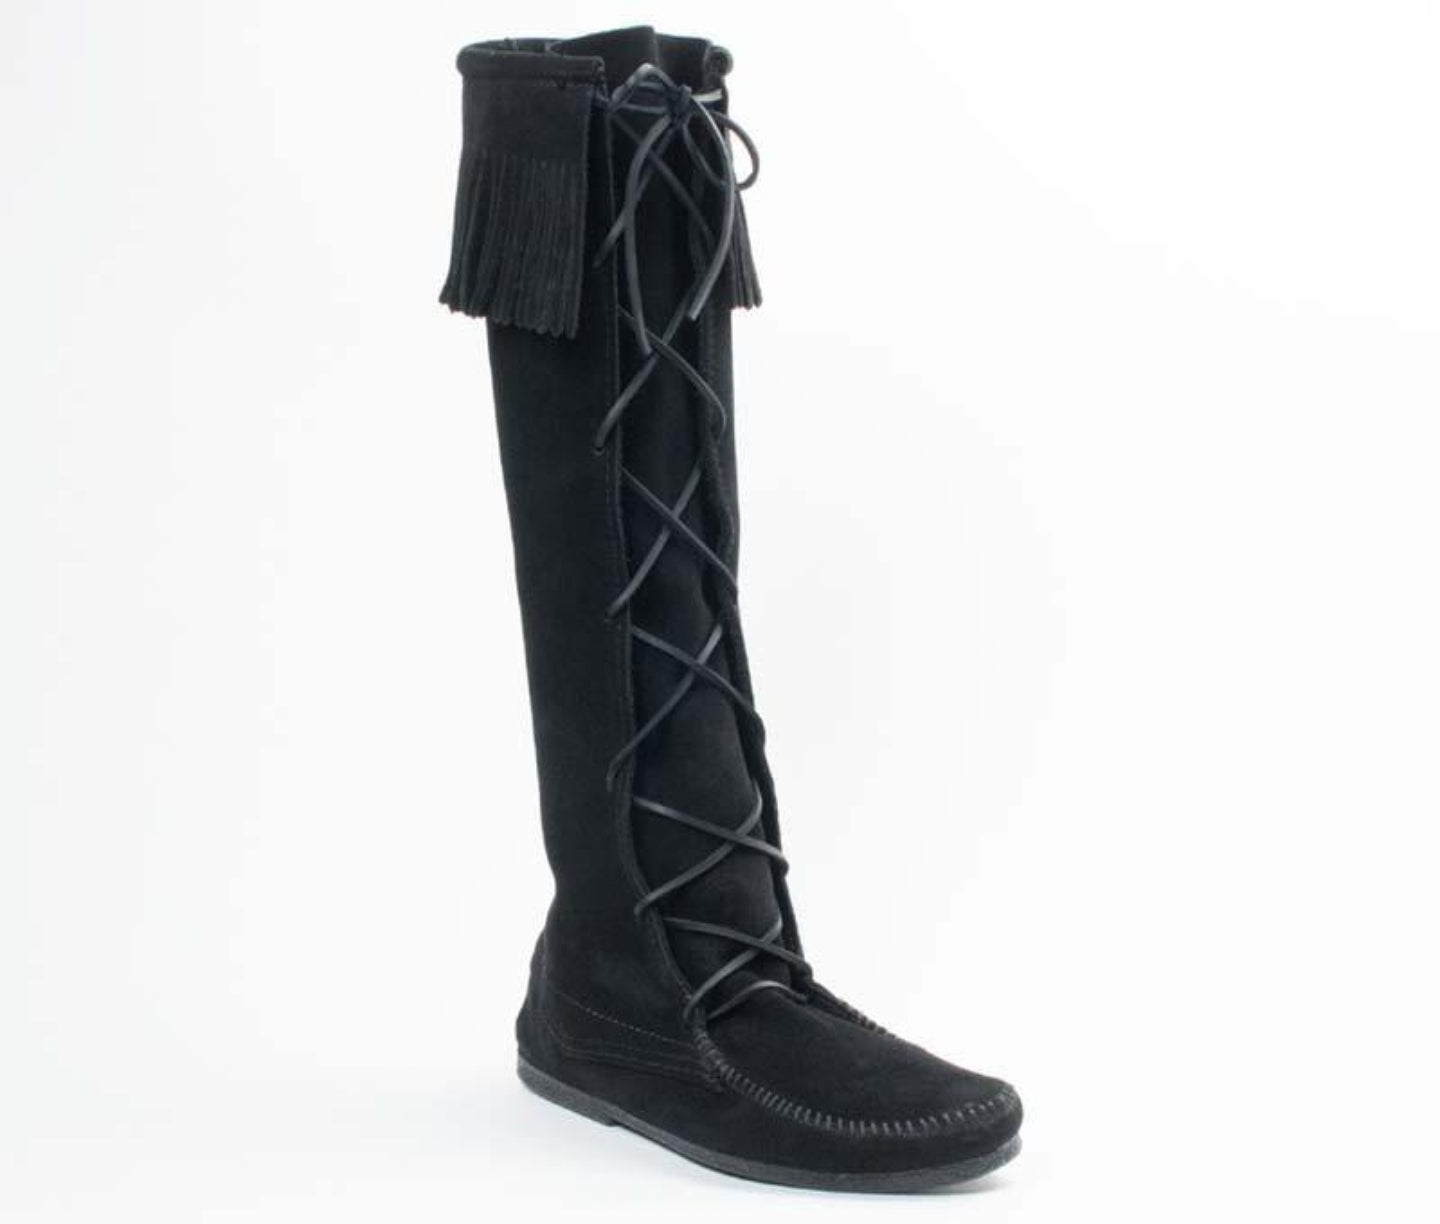 Front Lace Knee High Boot in Black from 3/4 Angle View